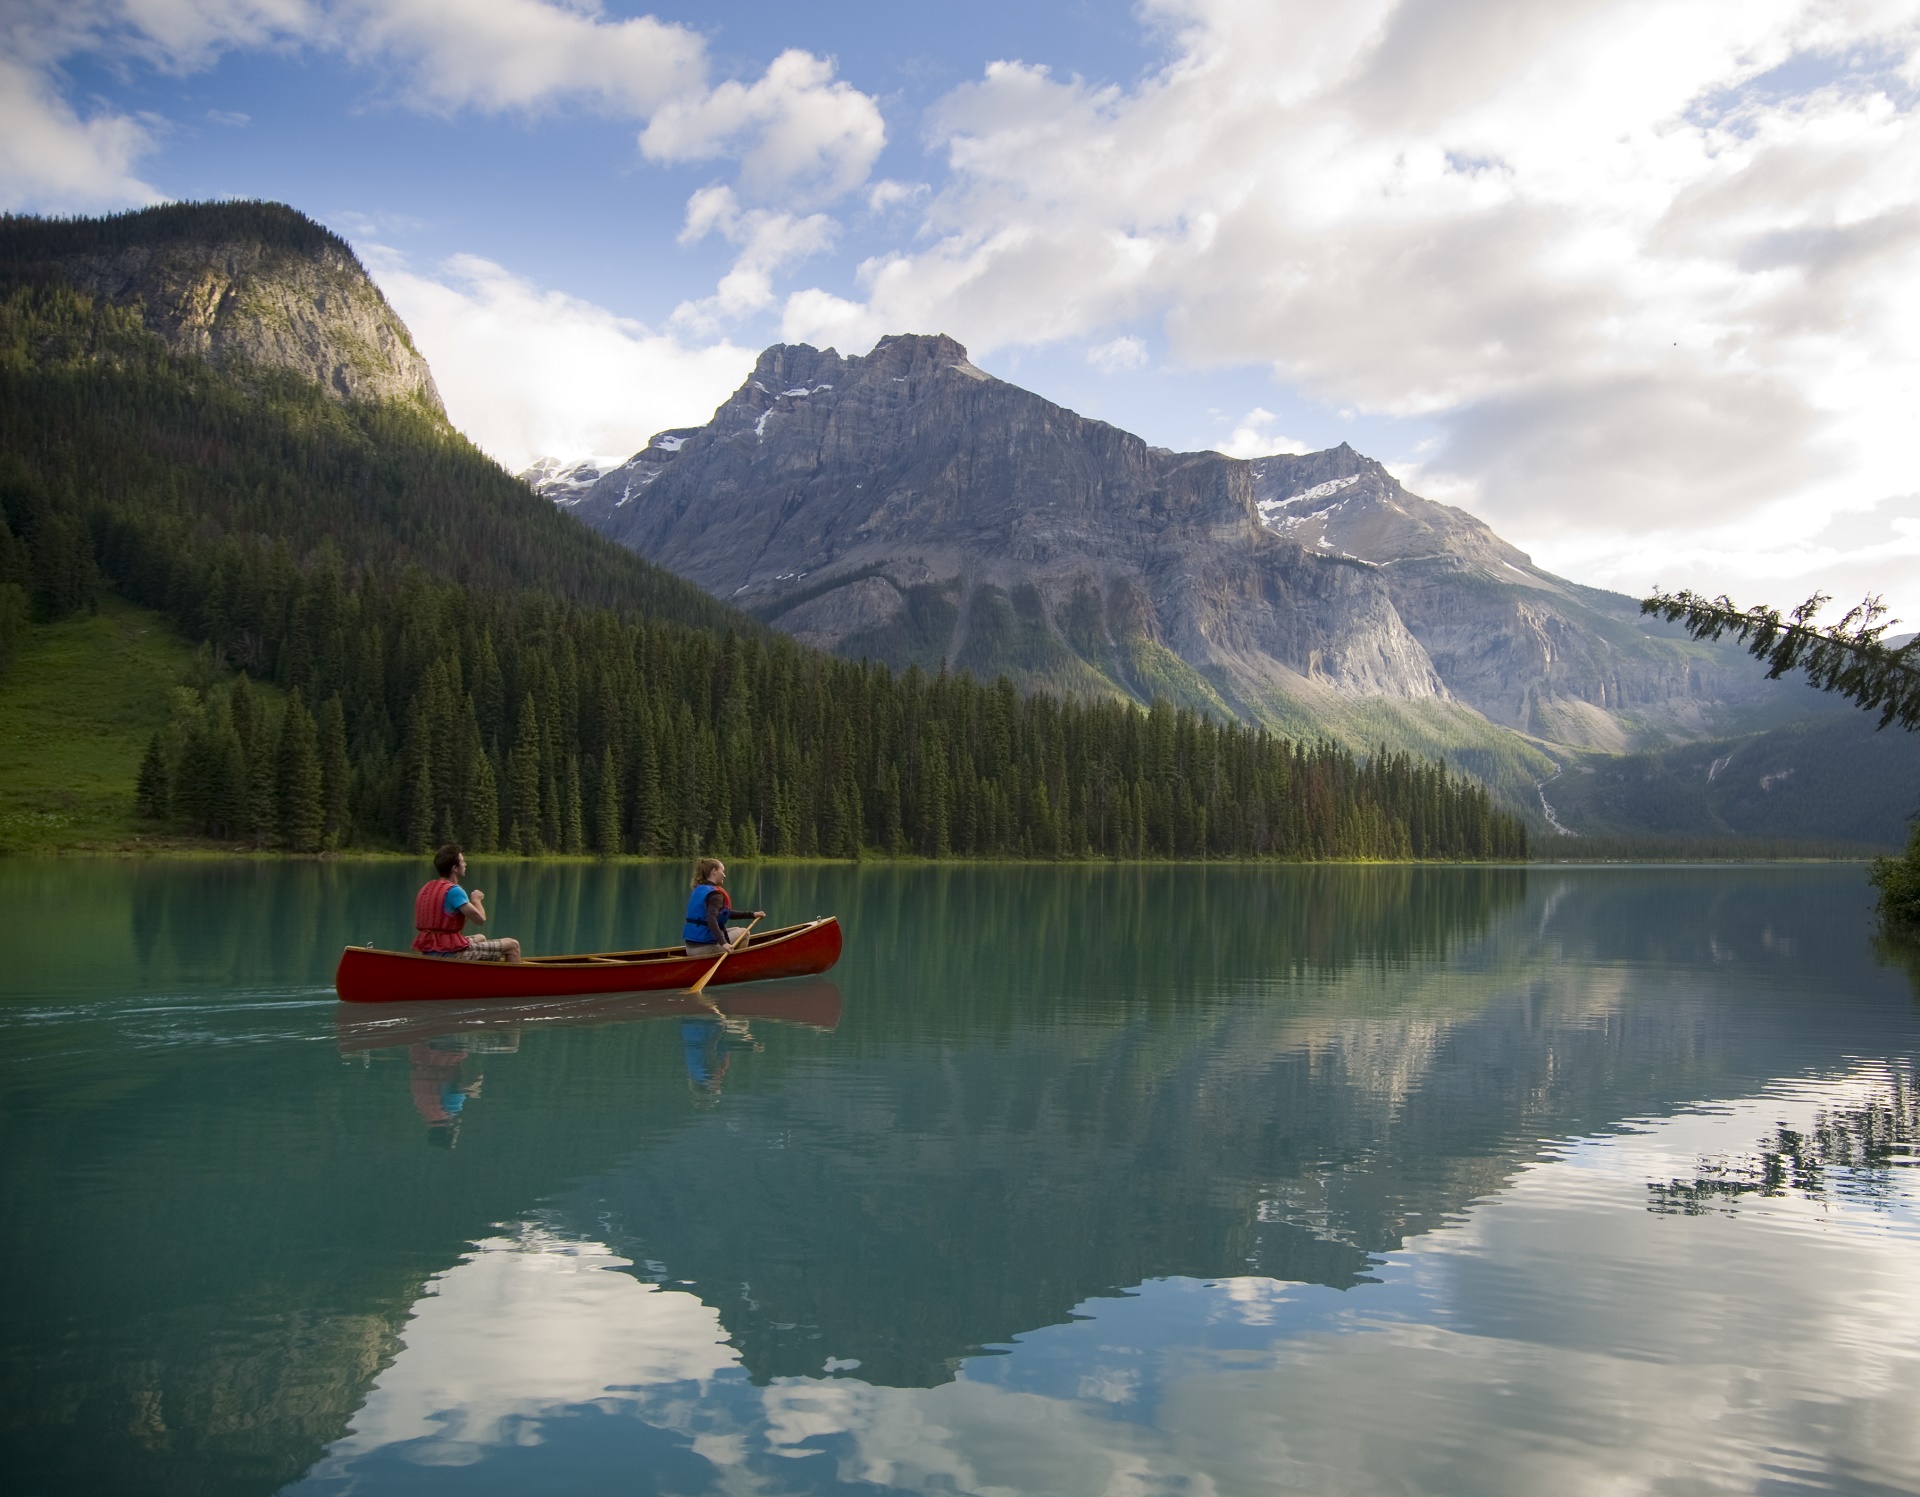 A red canoe is paddled by two people across a lake in Yoho National Park. The turquoise lake is surrounded by mountains and trees.